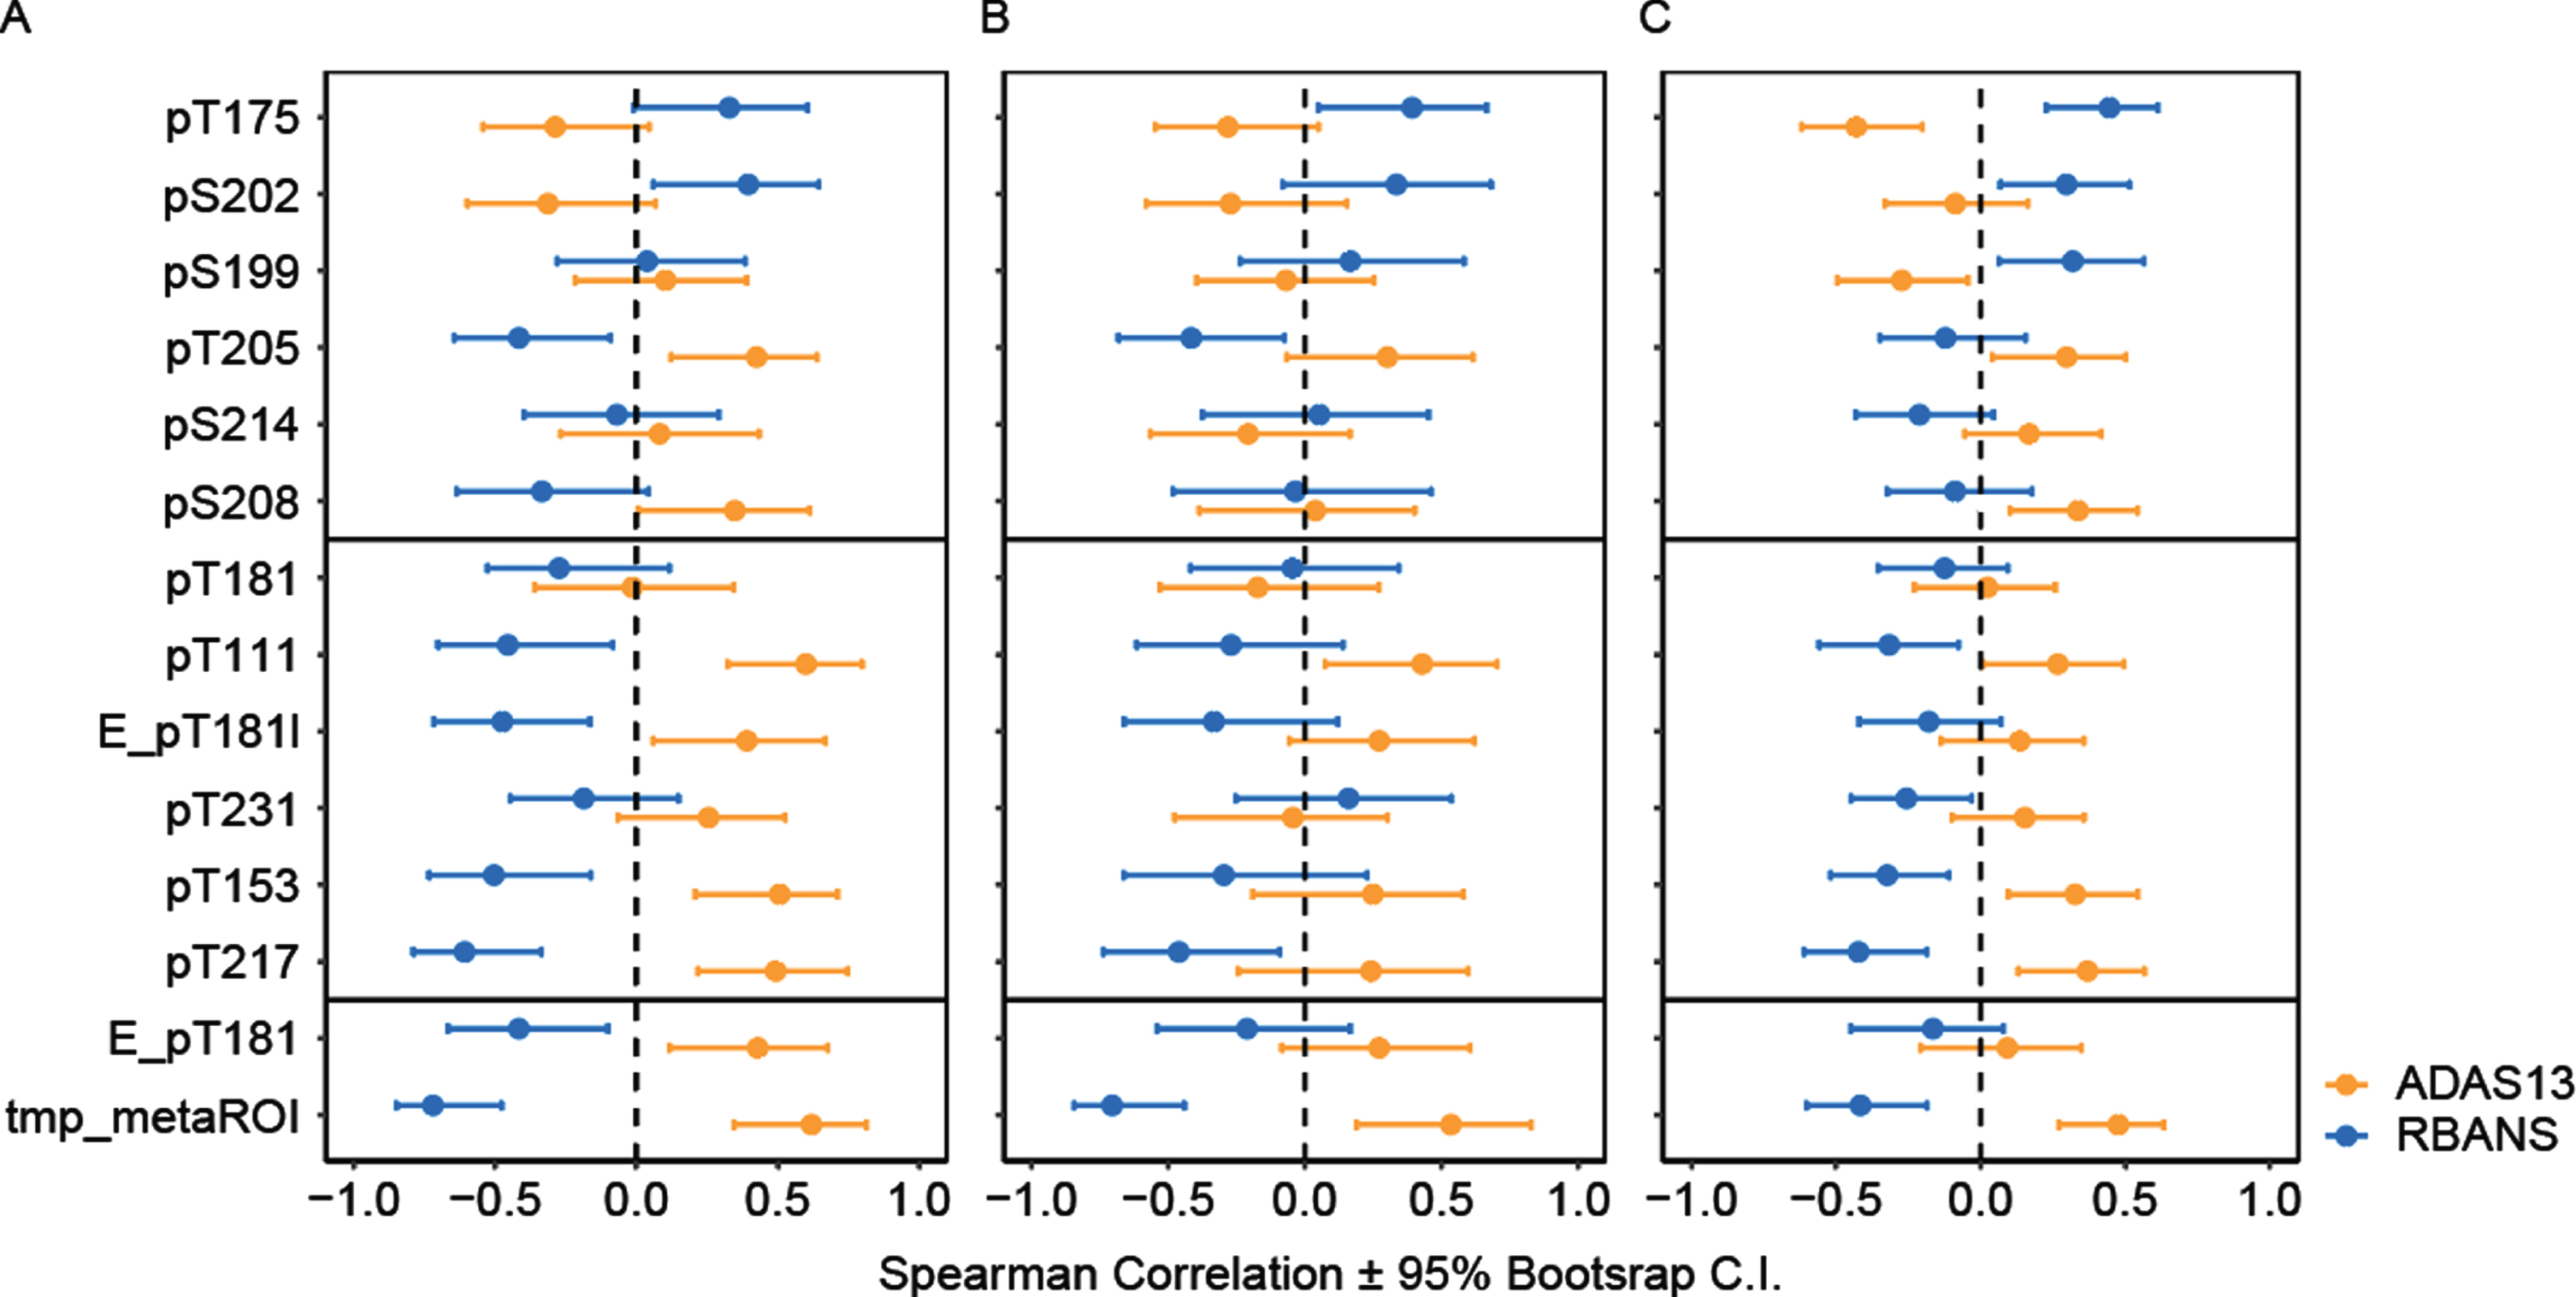 Association between [18F]GTP1 SUVR (tmp_metaROI) and CSF p-tau measures with cognitive scores in different regions in (A) Cohort A, (B) in Cohort A excluding cognitively normal individuals, and (C) in Cohort B. Middle sites: “pT217 cluster”, Elecsys pTau181 level (pg/mL):E_pT181l, Elecsys pTau181/tTau ratio: E_pT181, MS pTau/uTau ratios: pX###, temporal meta ROI: tmp_metaROI.